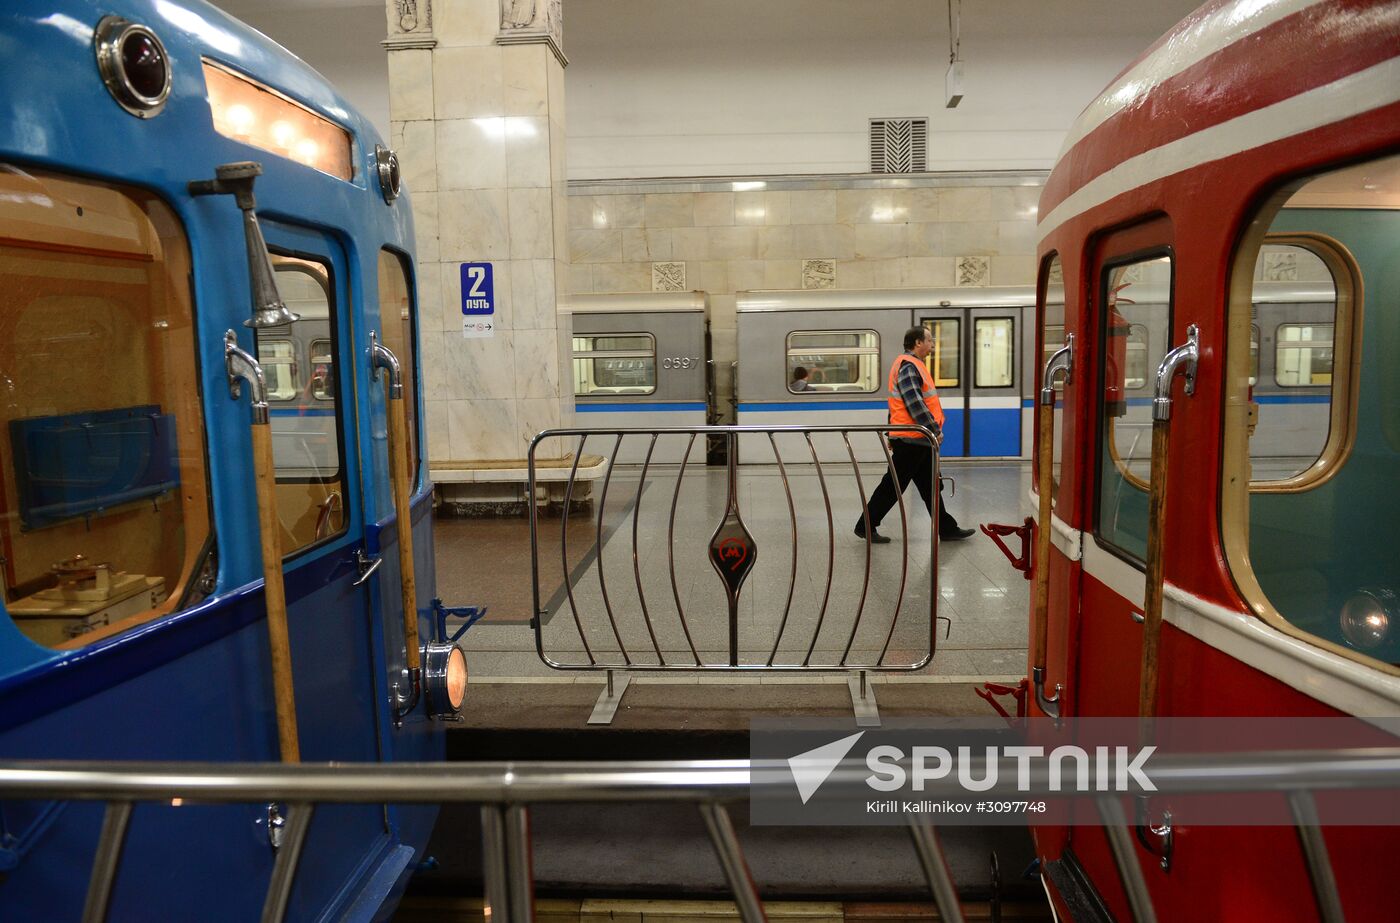 Display of antique Moscow metro trains